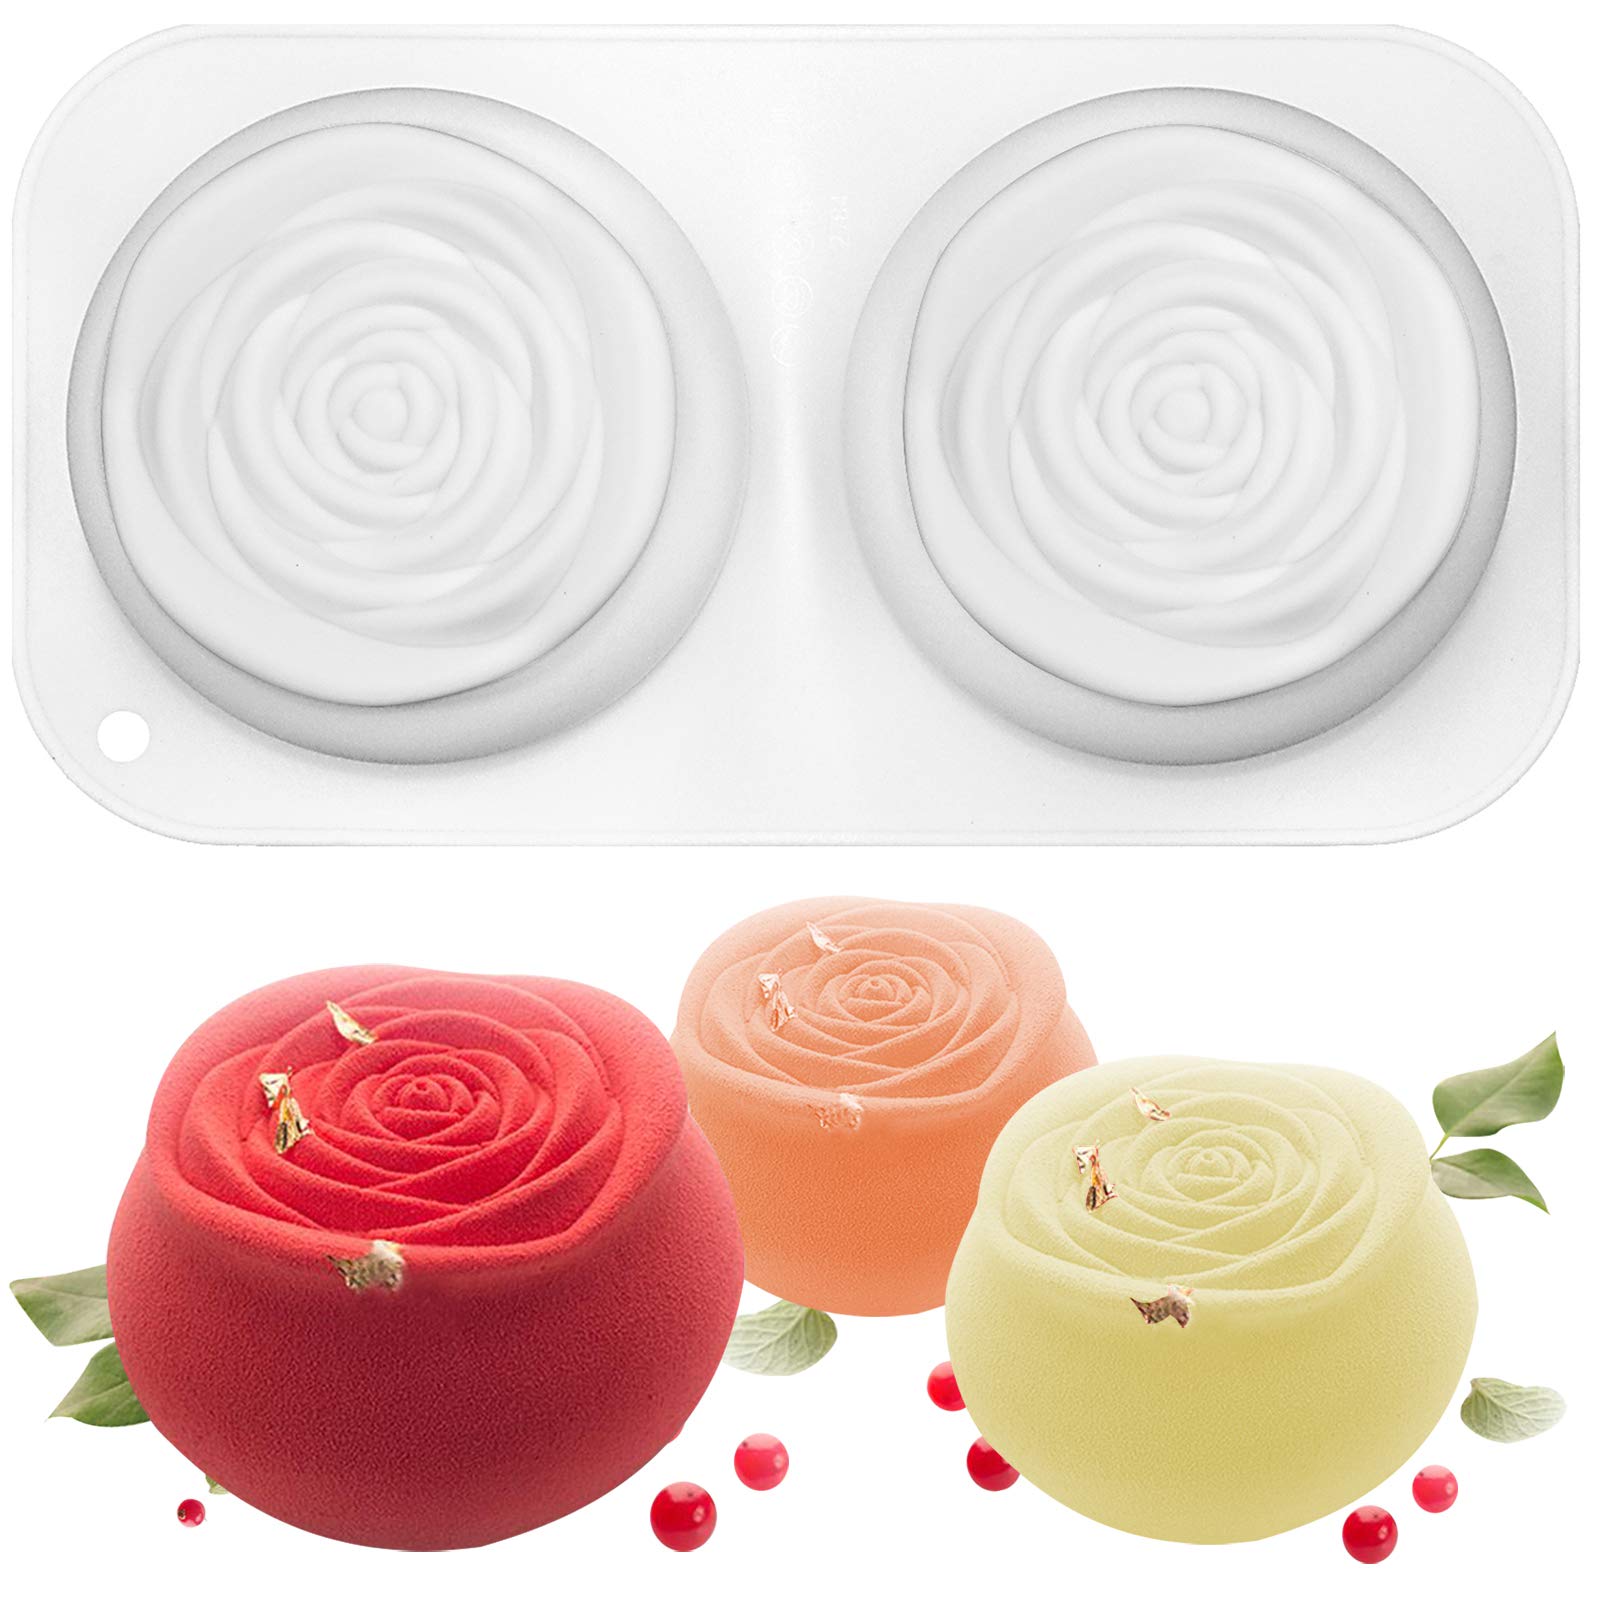 Funshowcase 2 Cavities Roses Cupcake Silicone Mold Tray Shape Size 4x4x2inch